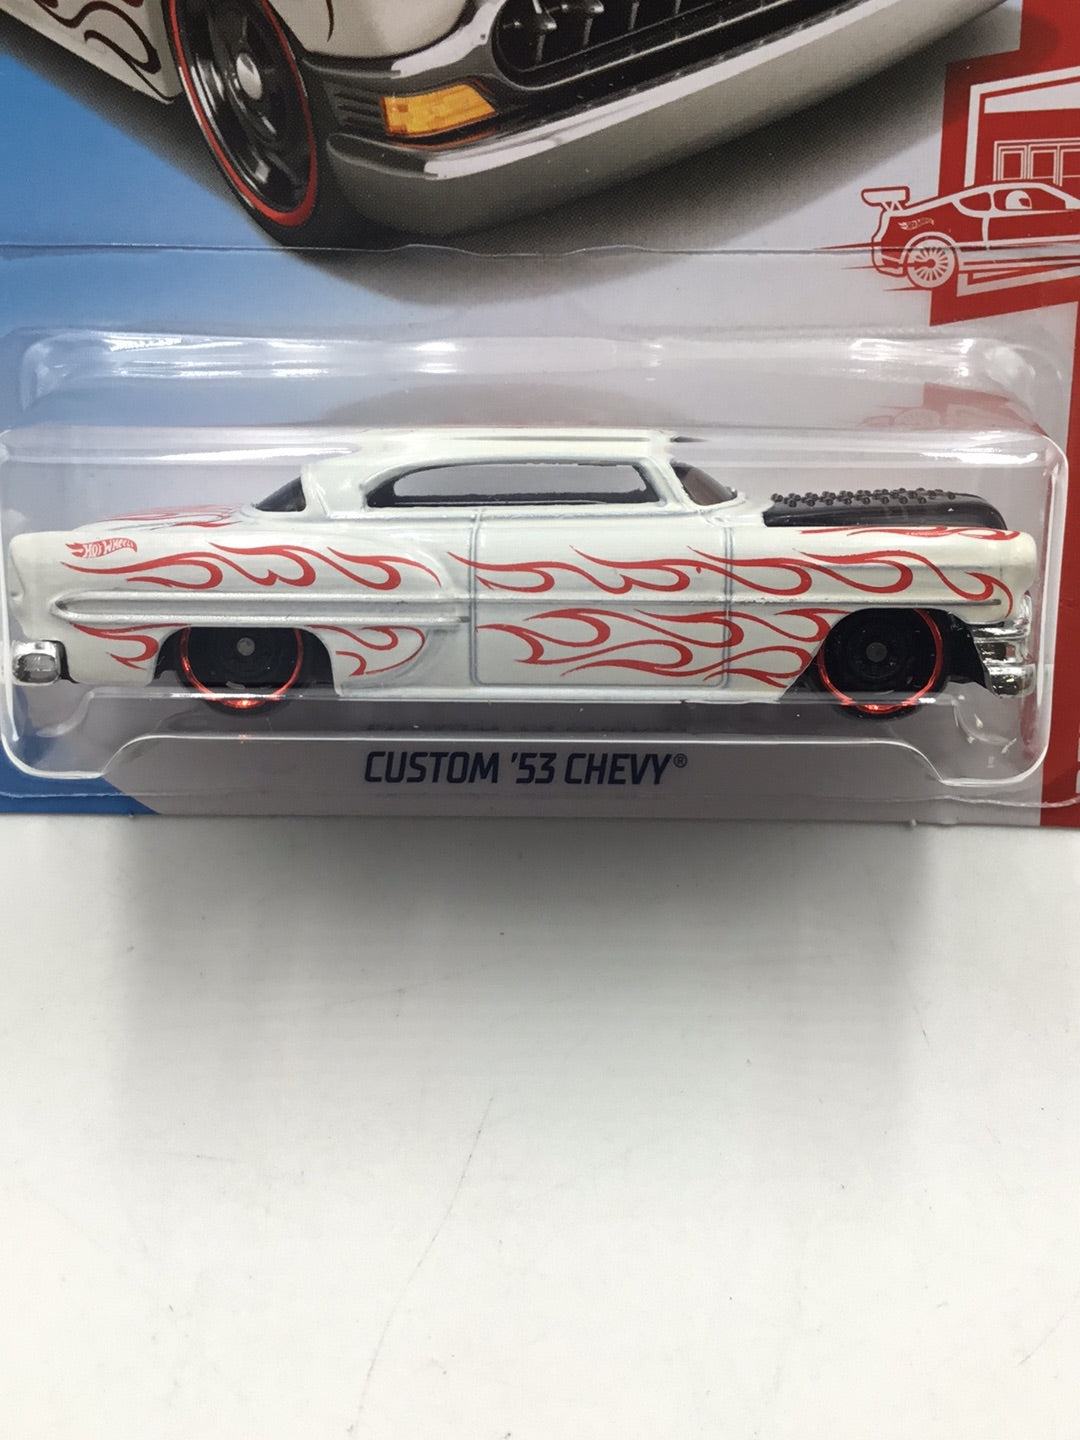 2018 hot wheels red edition #8 Custom 53 Chevy target red factory sealed sticker 150B